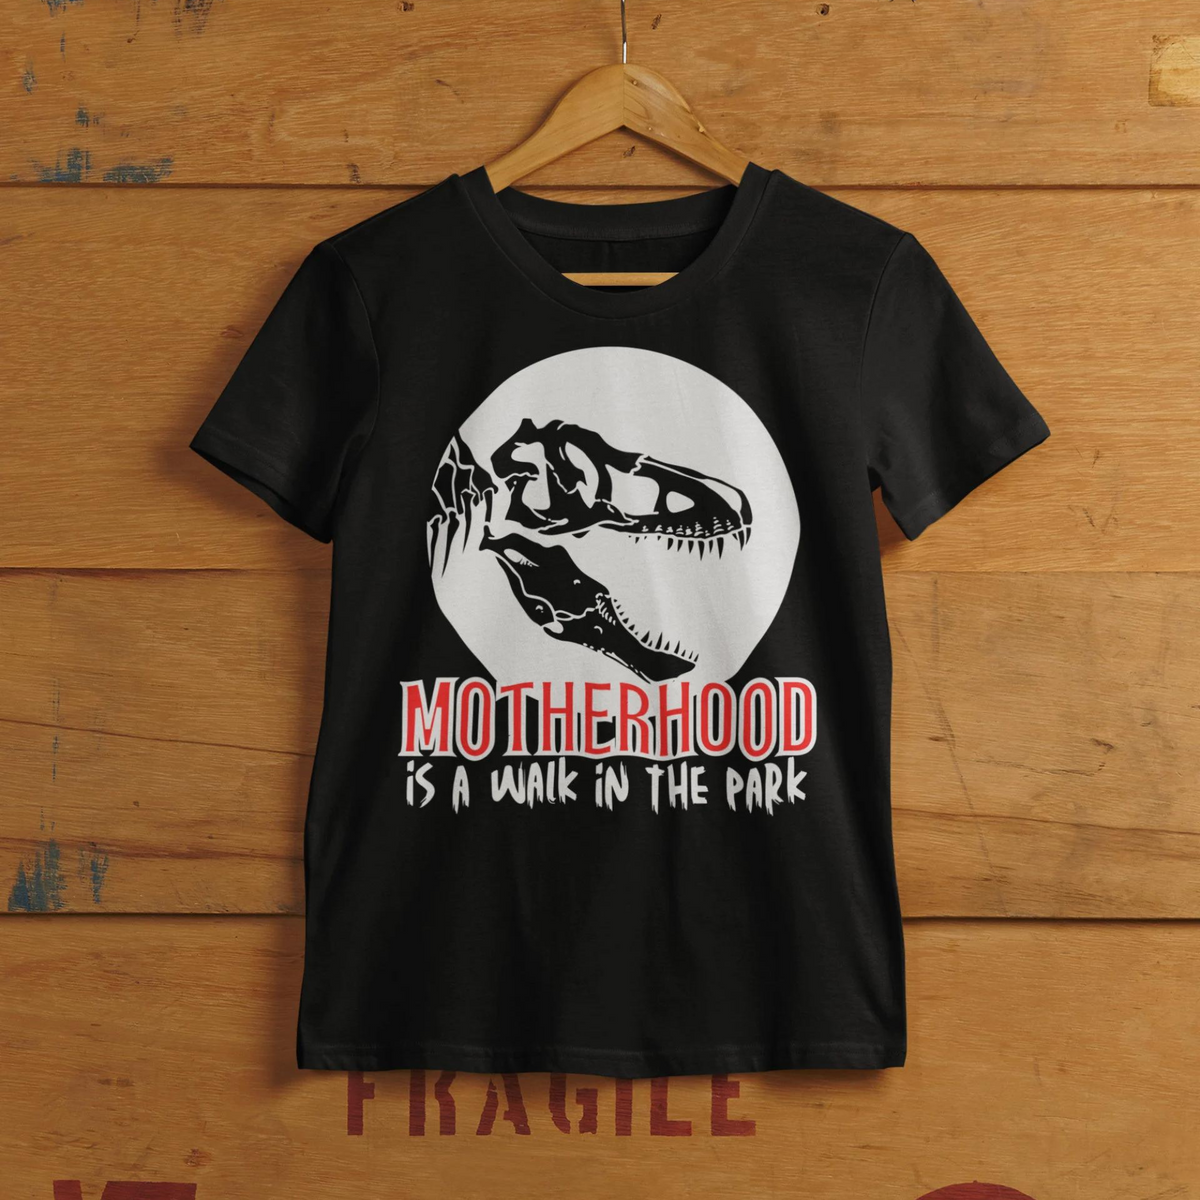 t-shirt, dinosaur, motherhood, parenting, family, mom life, comfortable, graphic design, mother's day, gift for mom, soft fabric, empowering phrase, casual style, strength, adventure, mom pride, chic, quality, lasting impression, cute design, love, grace, fashion, motherhood is a walk in the park tee